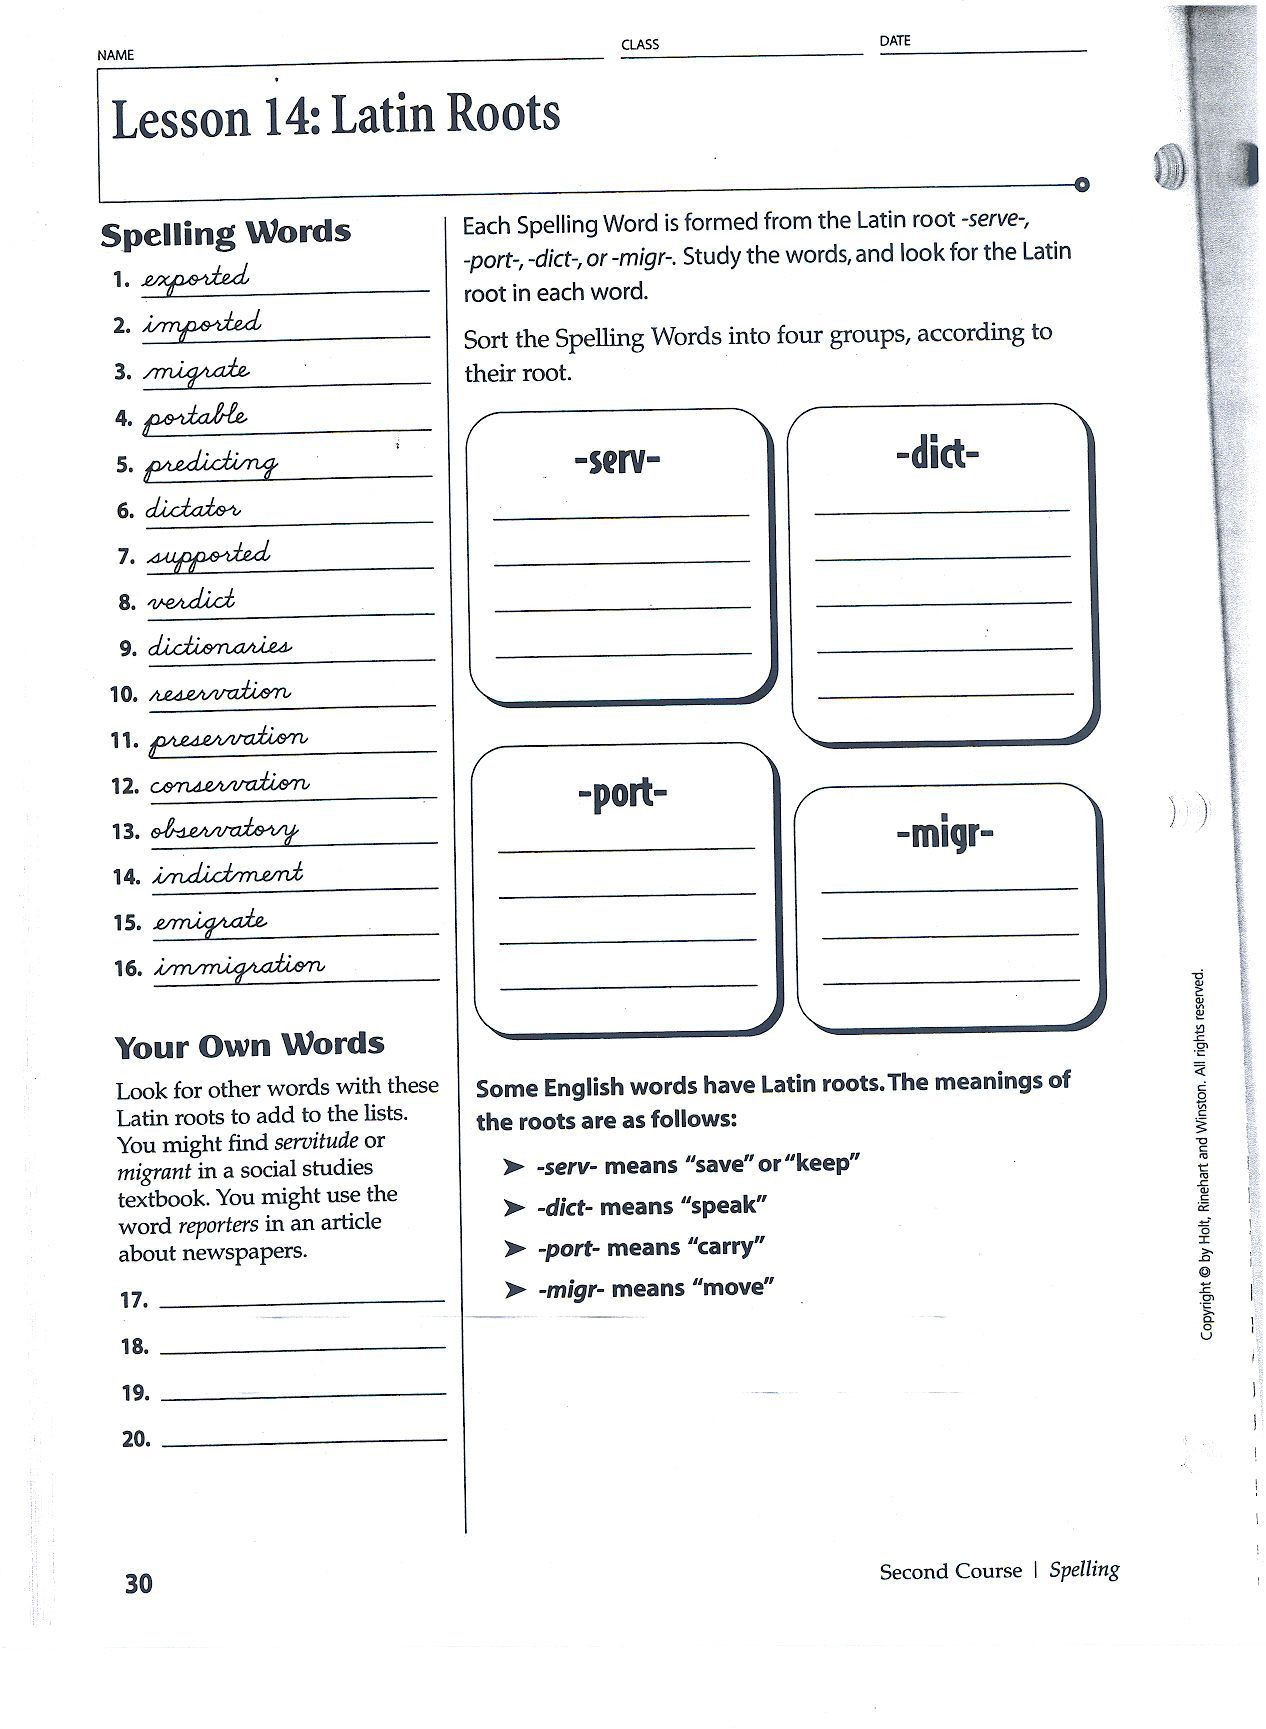 Greek and Latin Roots Worksheet 32 Greek and Latin Roots Worksheet 7th Grade Worksheet